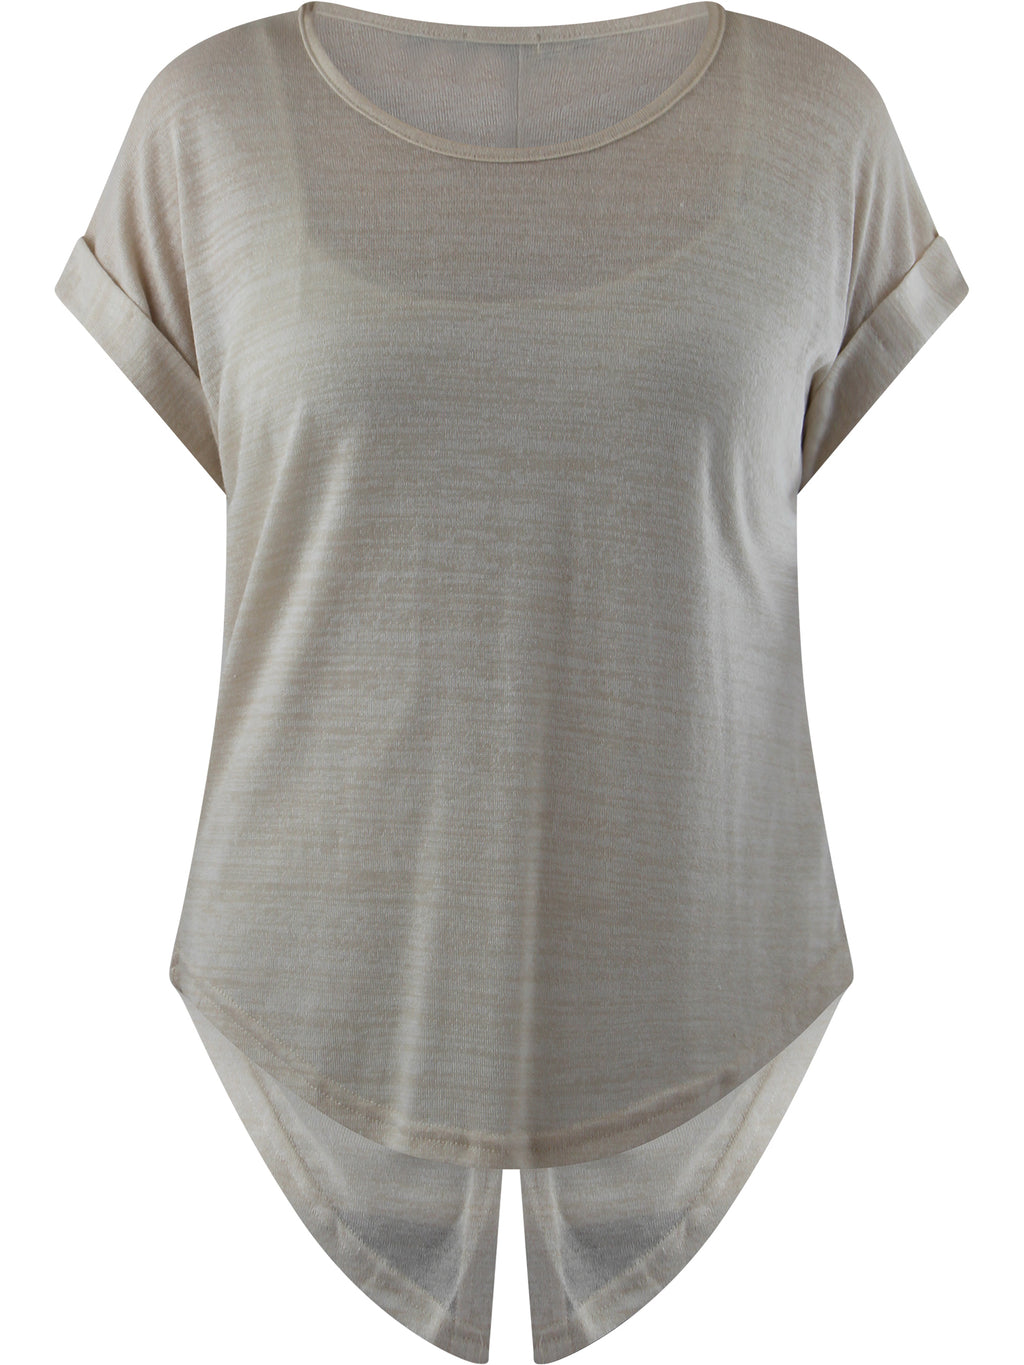 Ivory Heathered Knit Tie-Back Tee Top